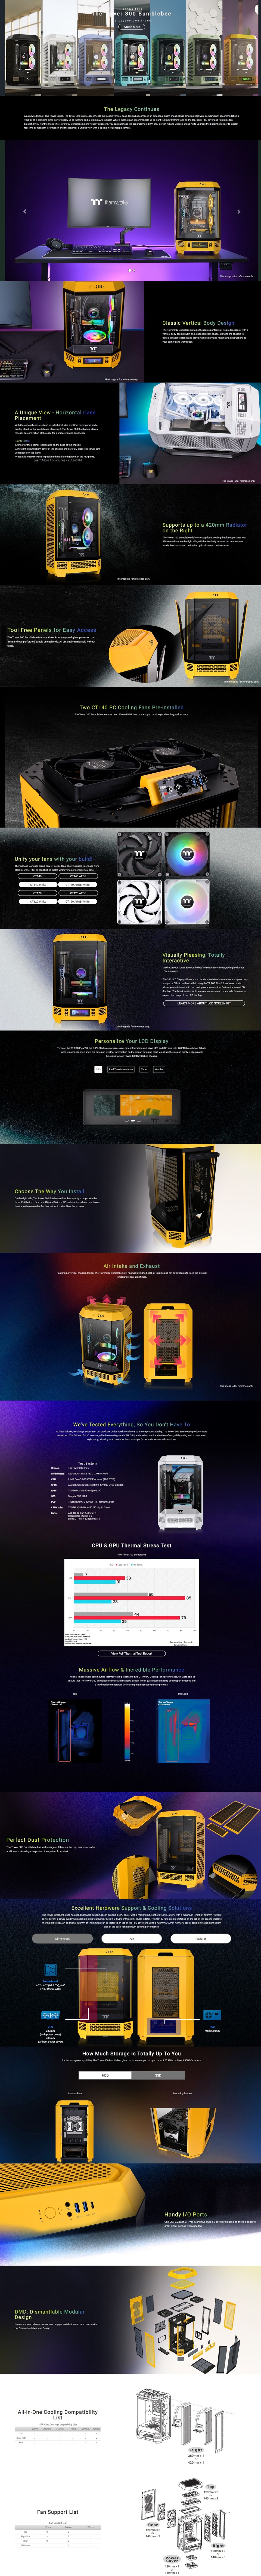 thermaltake the tower 300 tempered glass micro tower case bumblebee